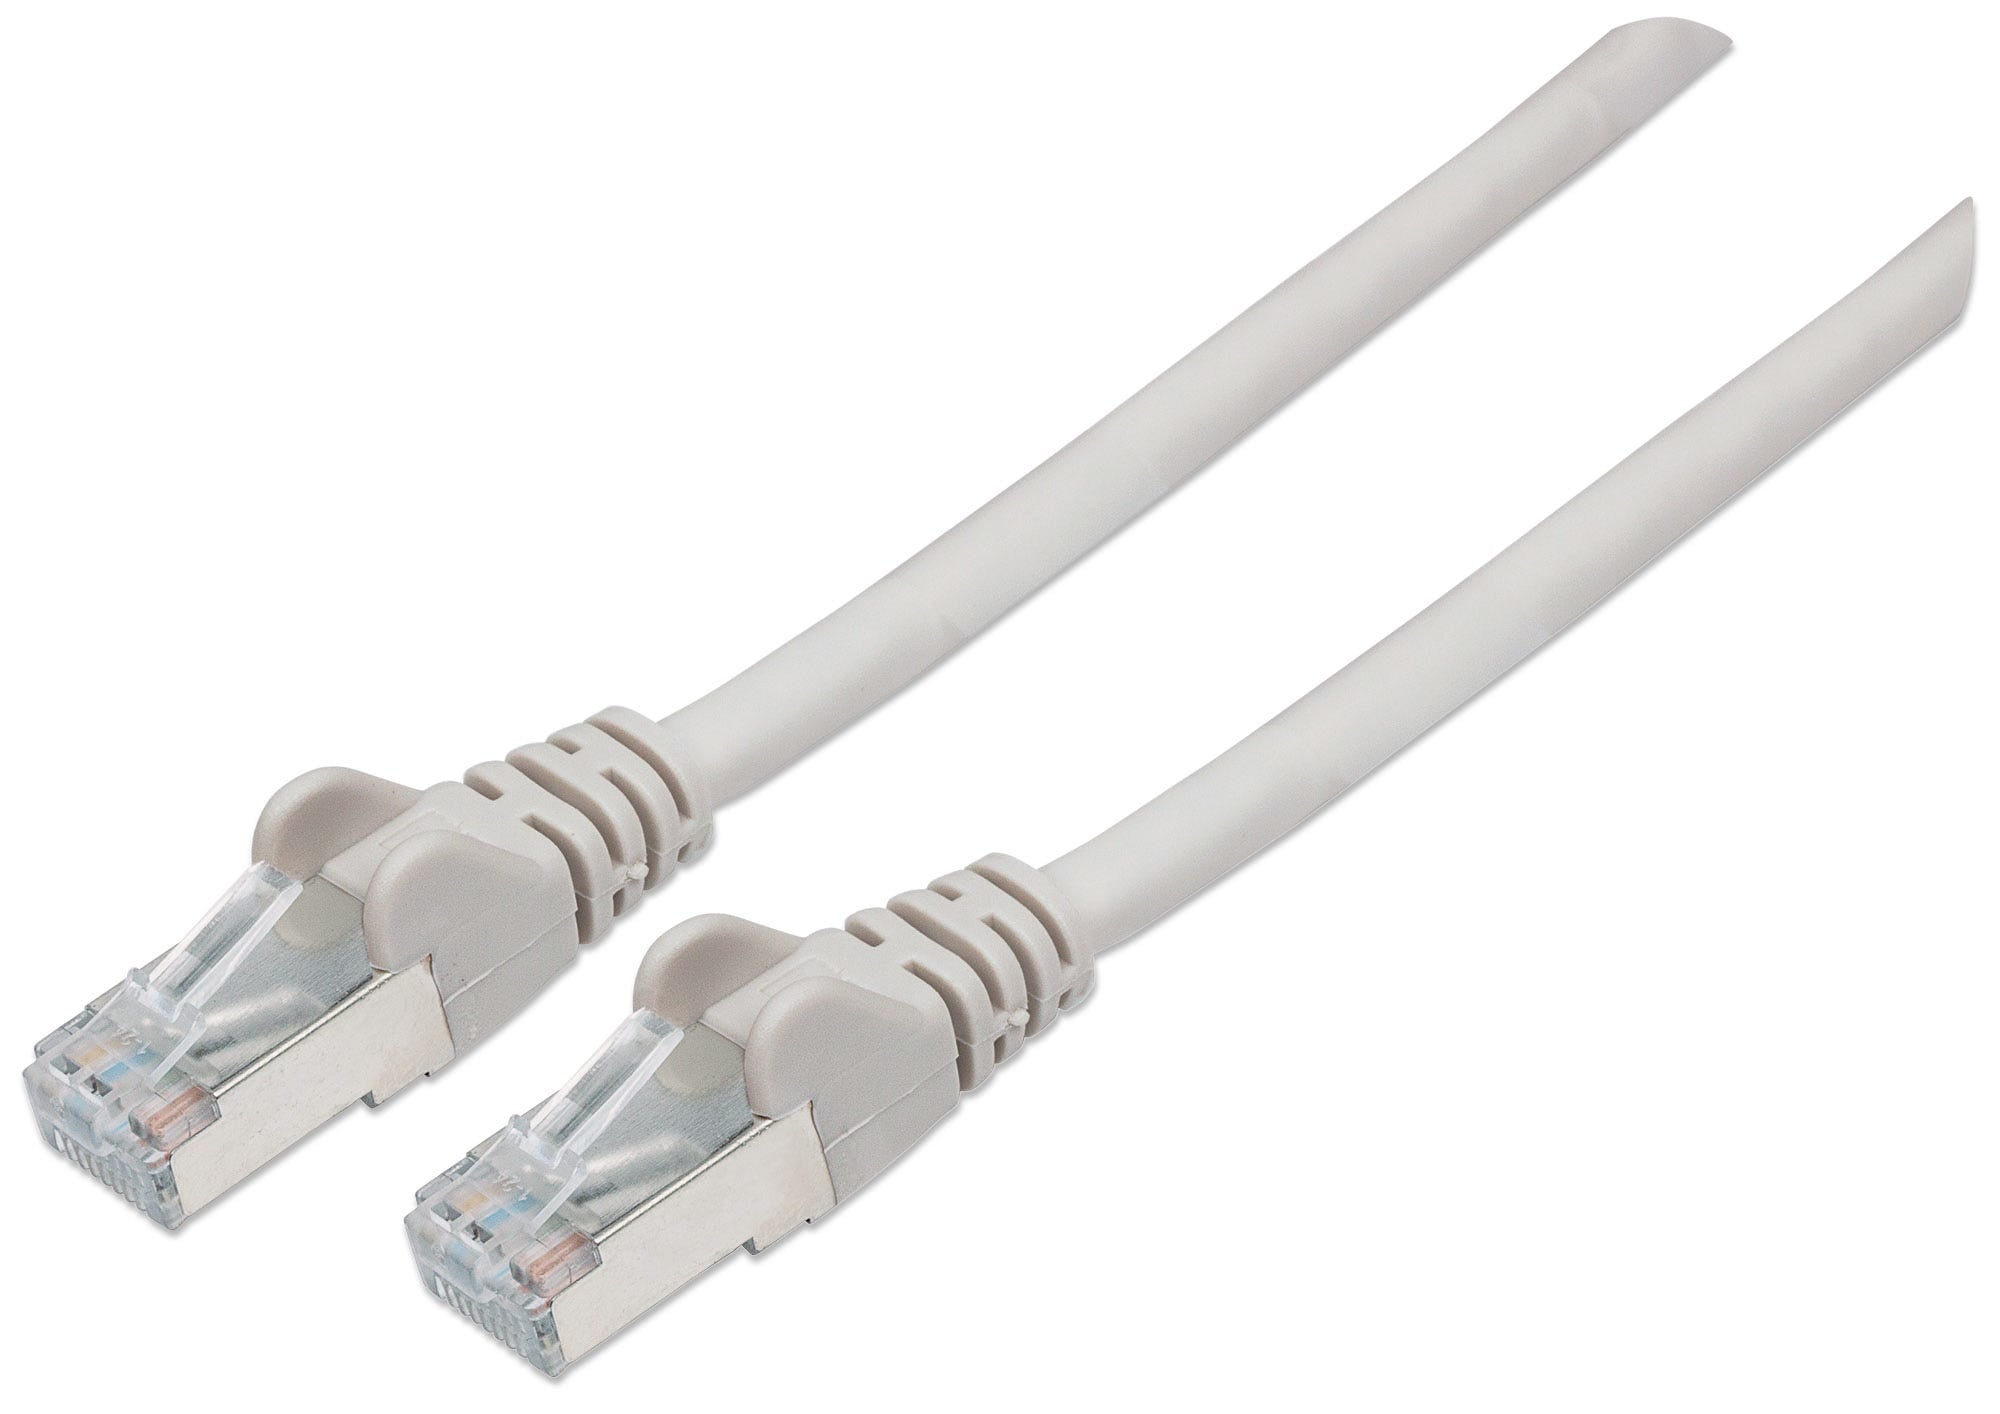 Intellinet Network Patch Cable, Cat6, 10m, Grey, Copper, S/FTP, LSOH / LSZH, PVC, RJ45, Gold Plated Contacts, Snagless, Booted, Lifetime Warranty, Polybag